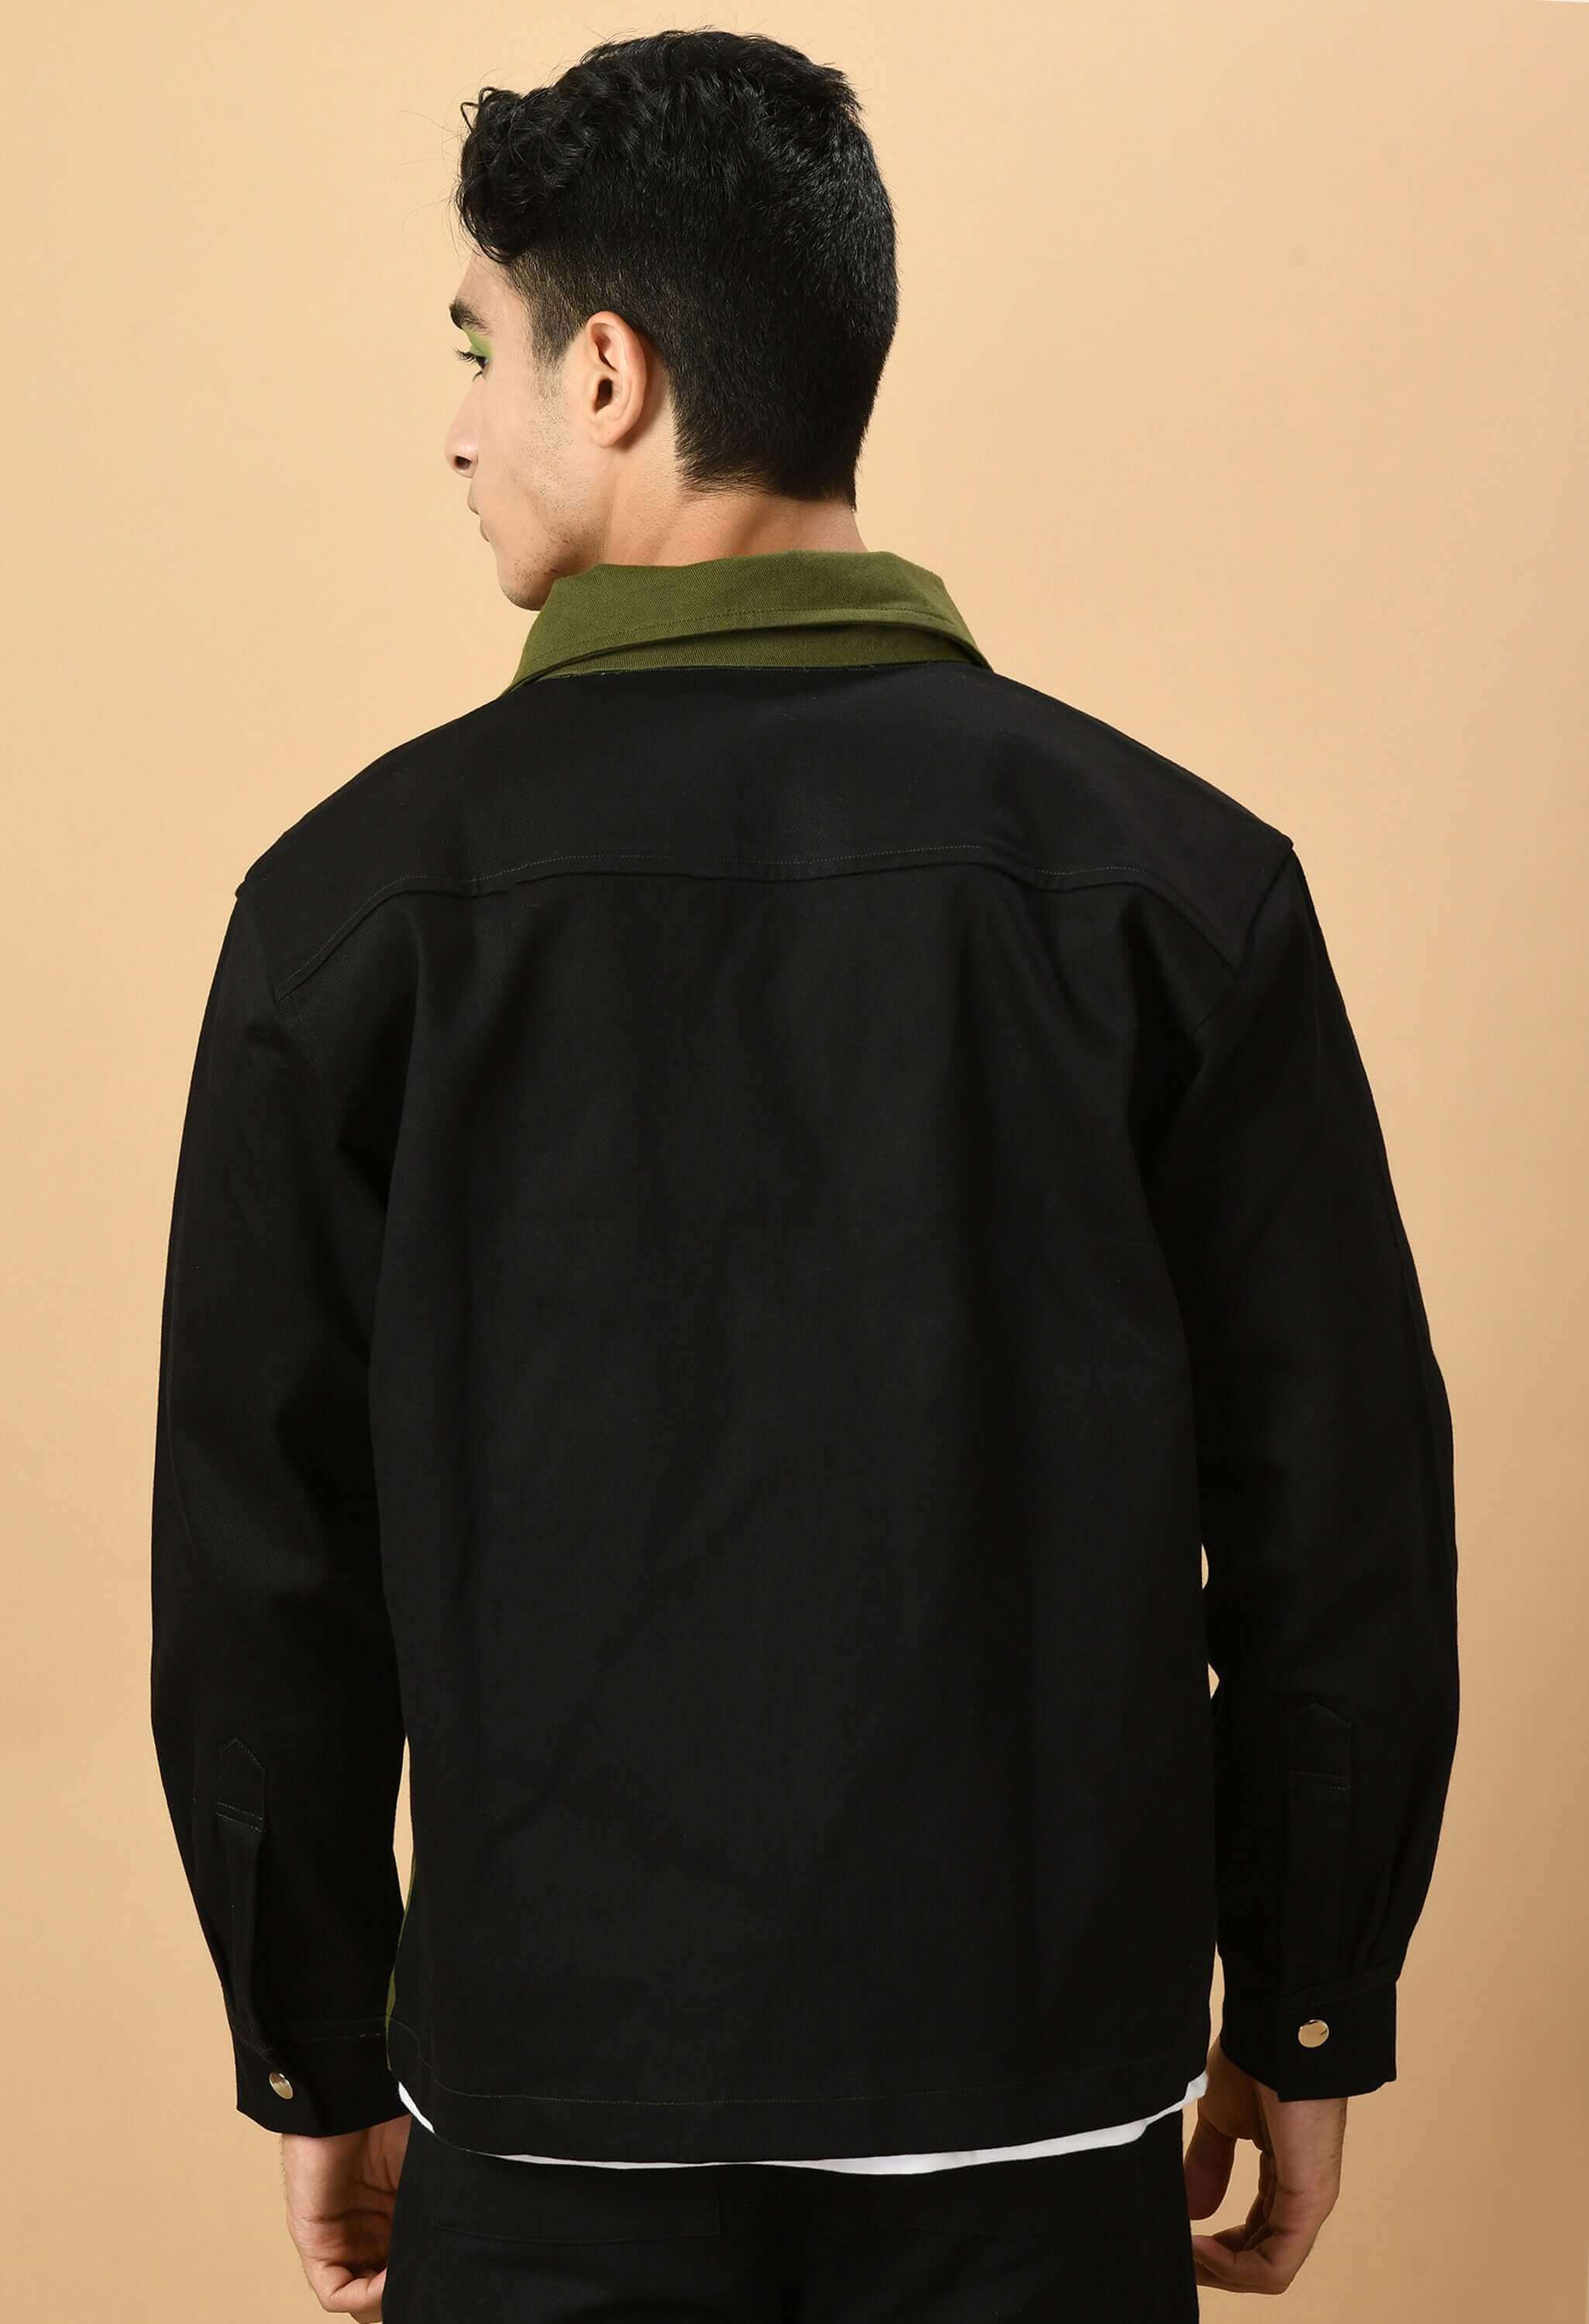  Black And Olive Color Overshirt By Offmint